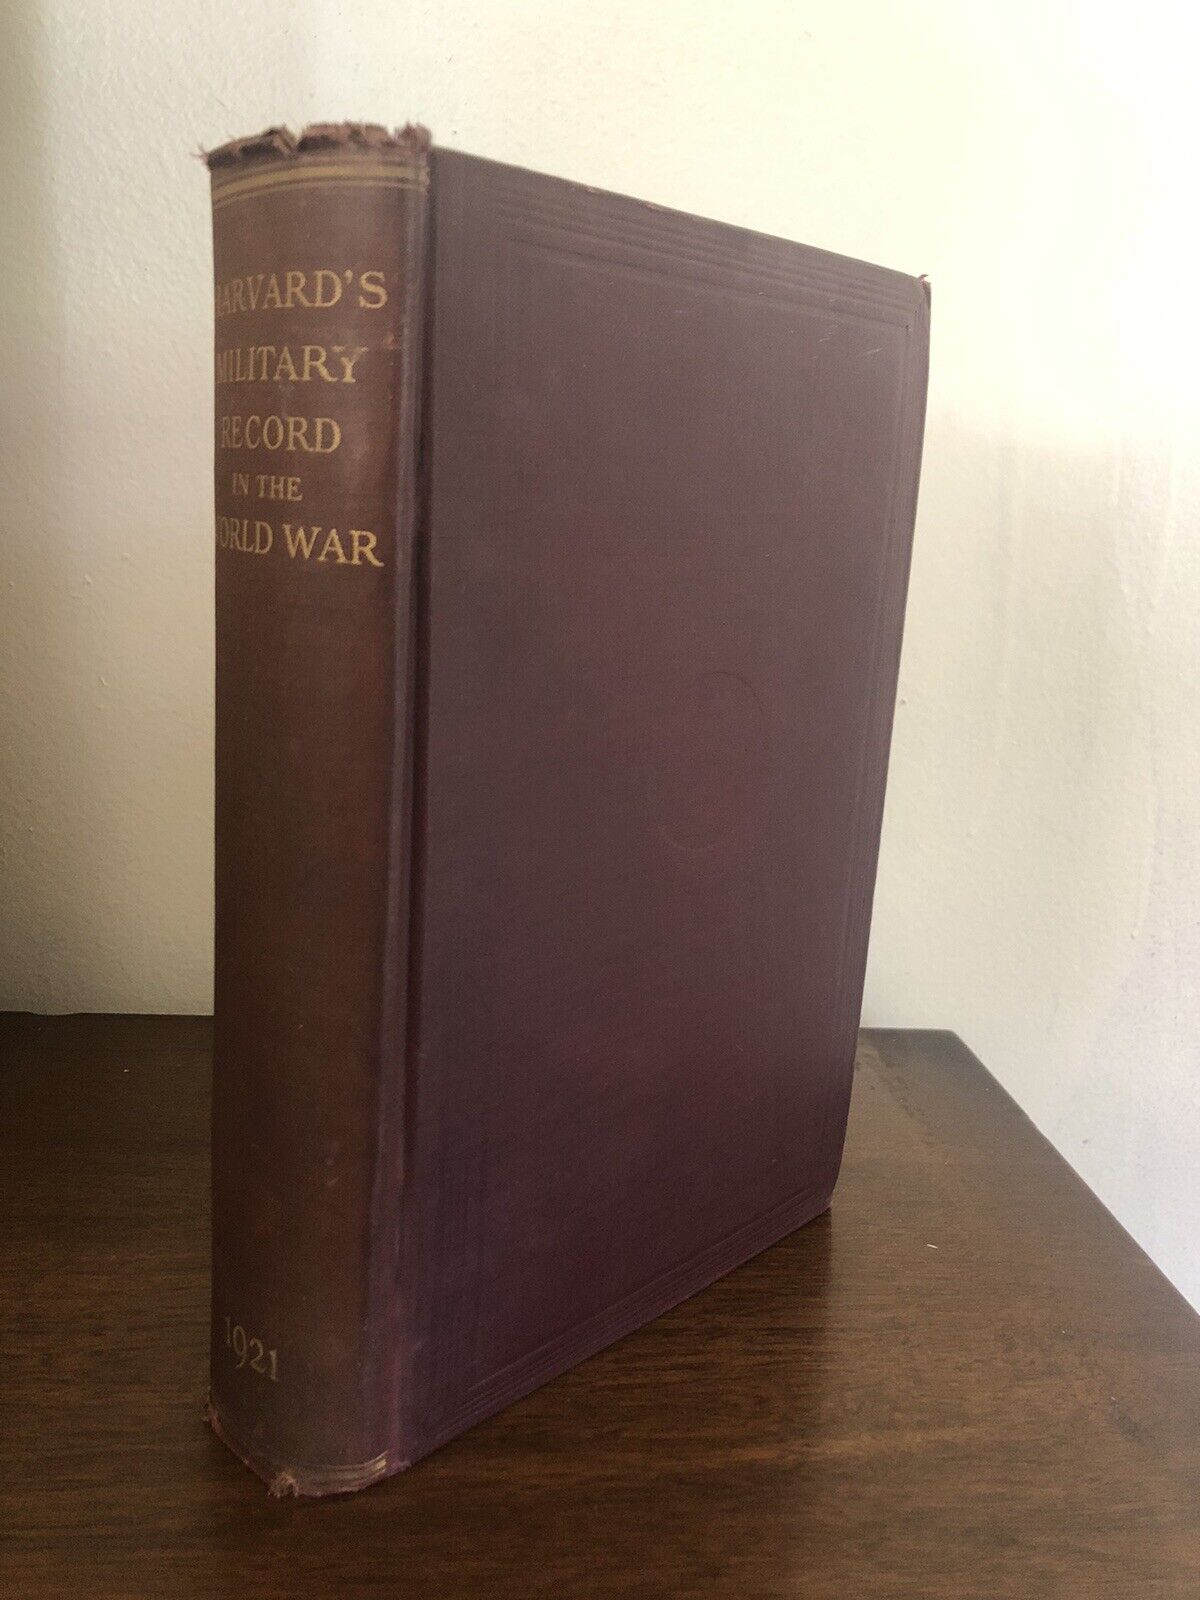 Harvard’s Military Record in the World War (1921) Antique Book Service Records